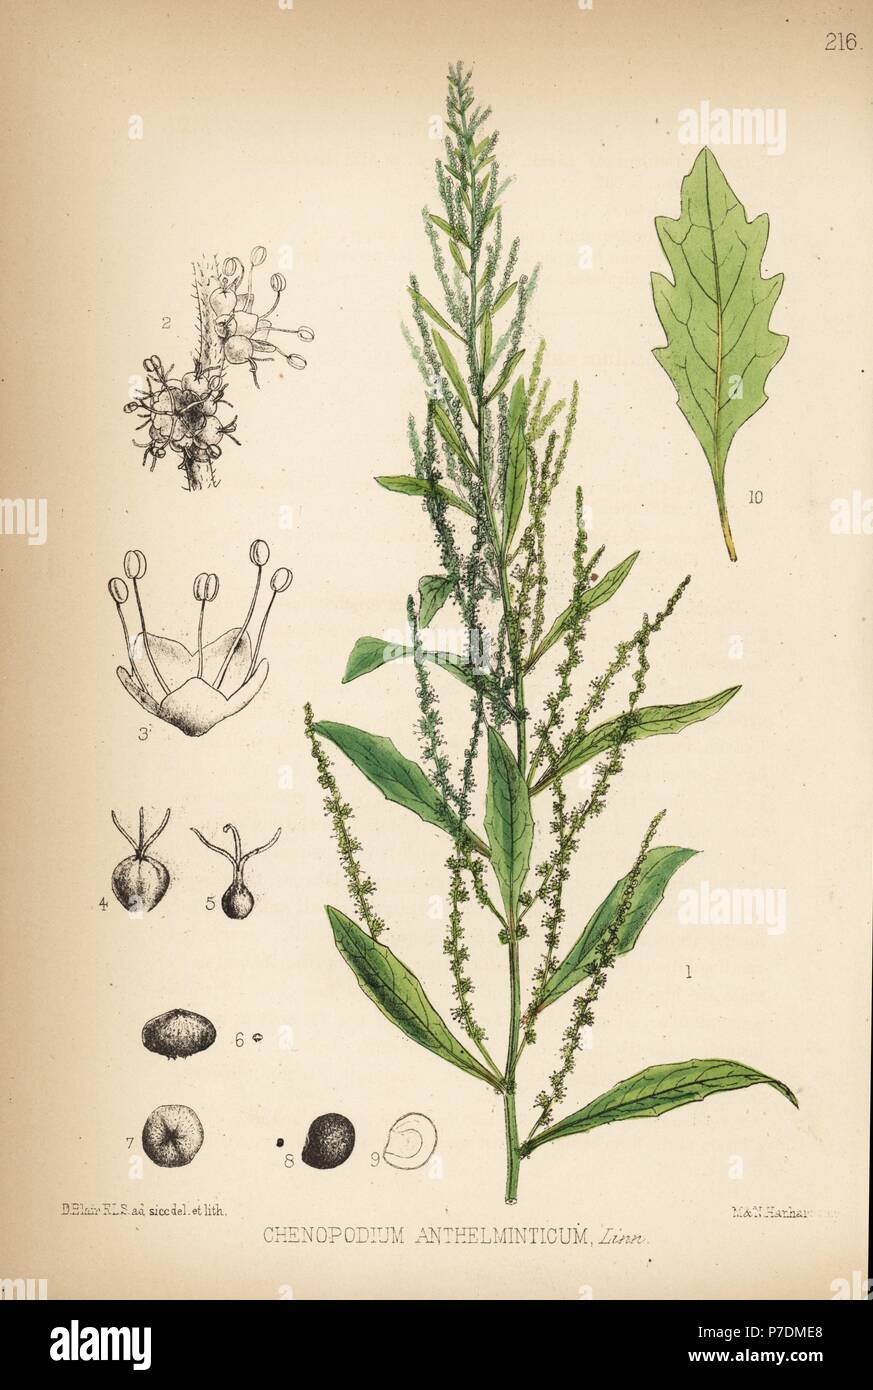 Jesuit's tea, wormseed or Jerusalem oak, Dysphania ambrosioides (Chenopodium anthelminticum). Handcoloured lithograph by Hanhart after a botanical illustration by David Blair from Robert Bentley and Henry Trimen's Medicinal Plants, London, 1880. Stock Photo